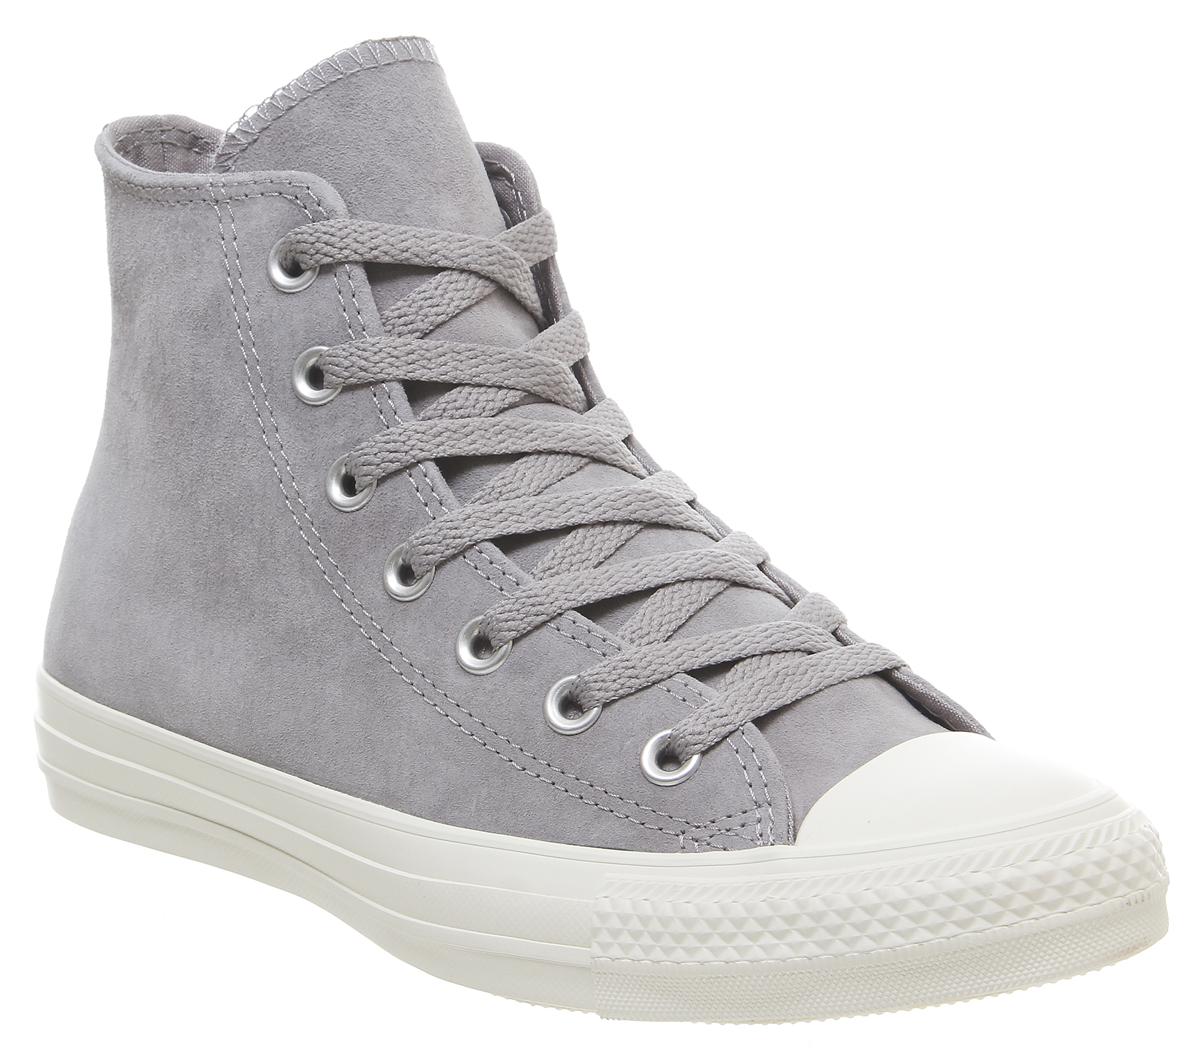 converse all star gray leather